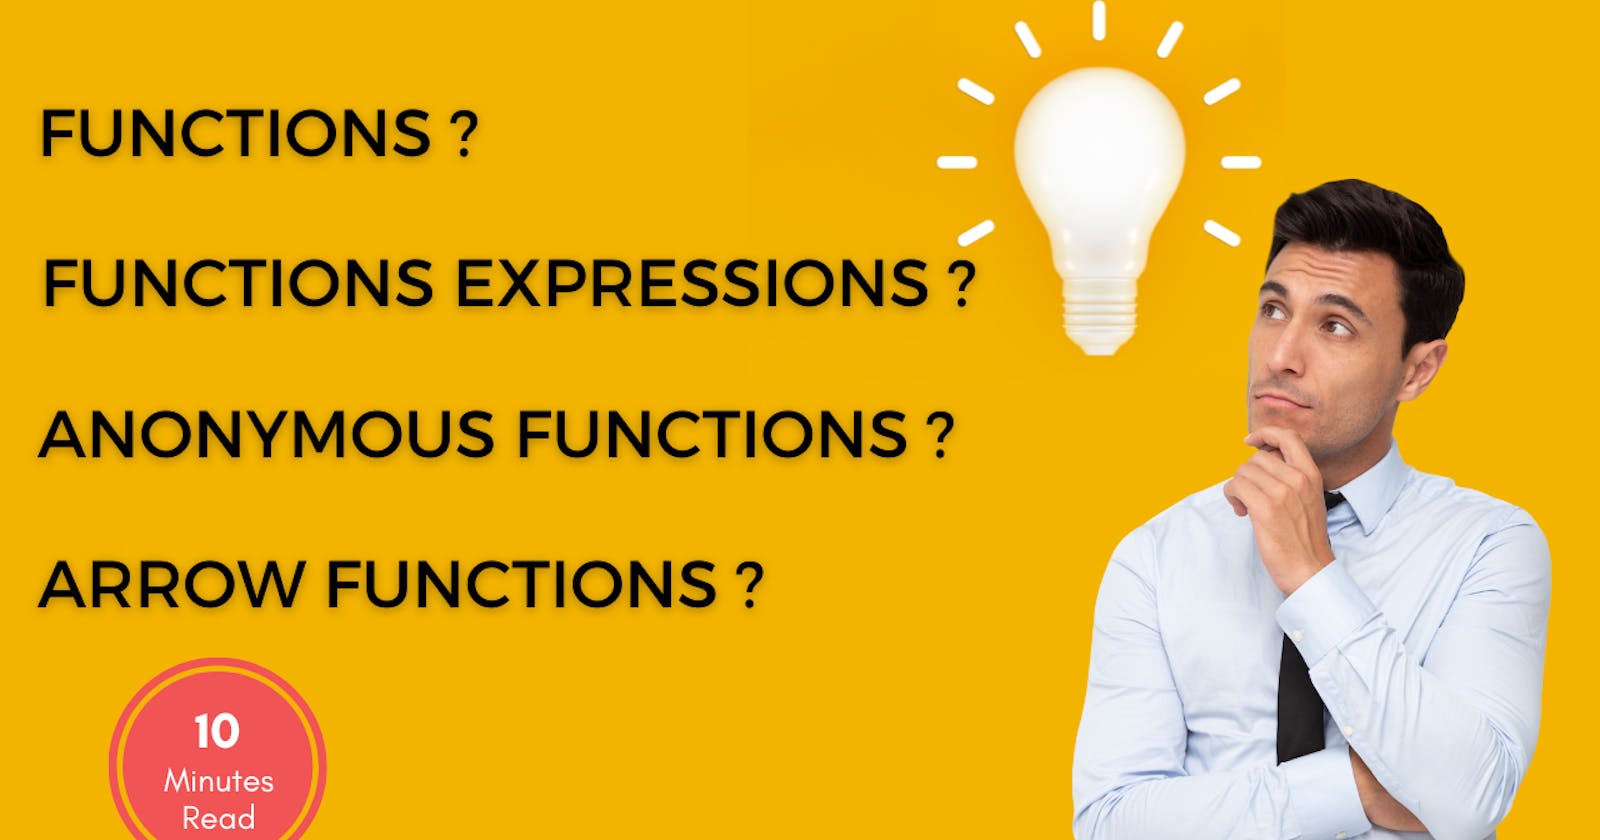 Function vs Arrow functions vs Anonymous Functions vs Functions Expressions?